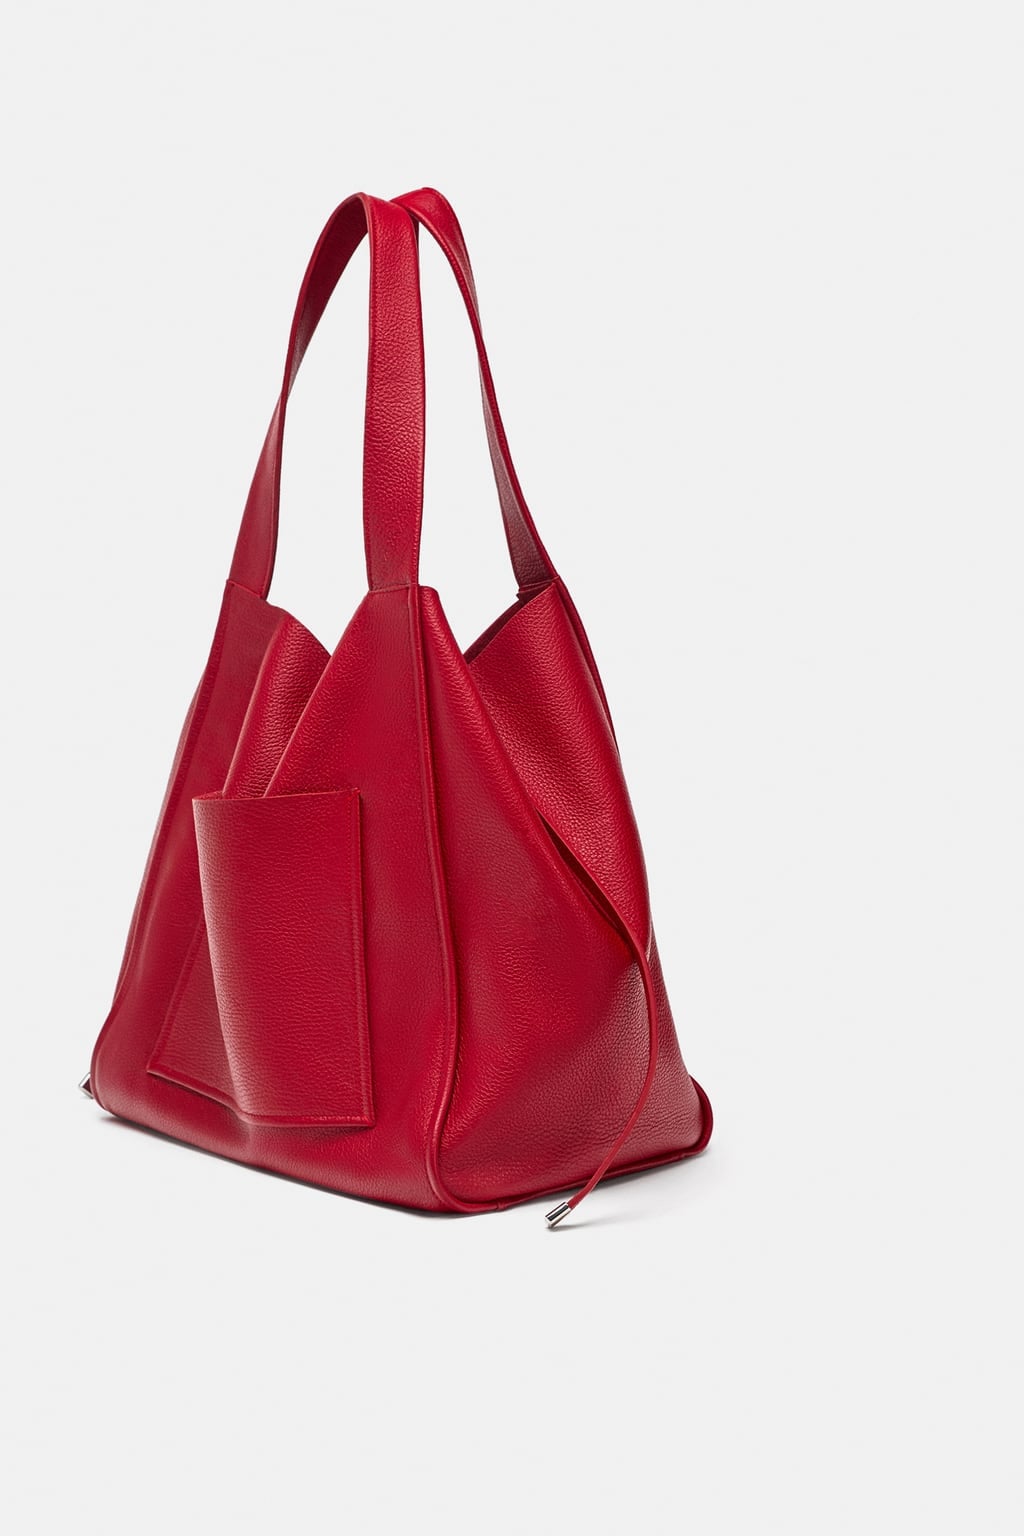 Zara Leather Shopper | Your Ultimate 